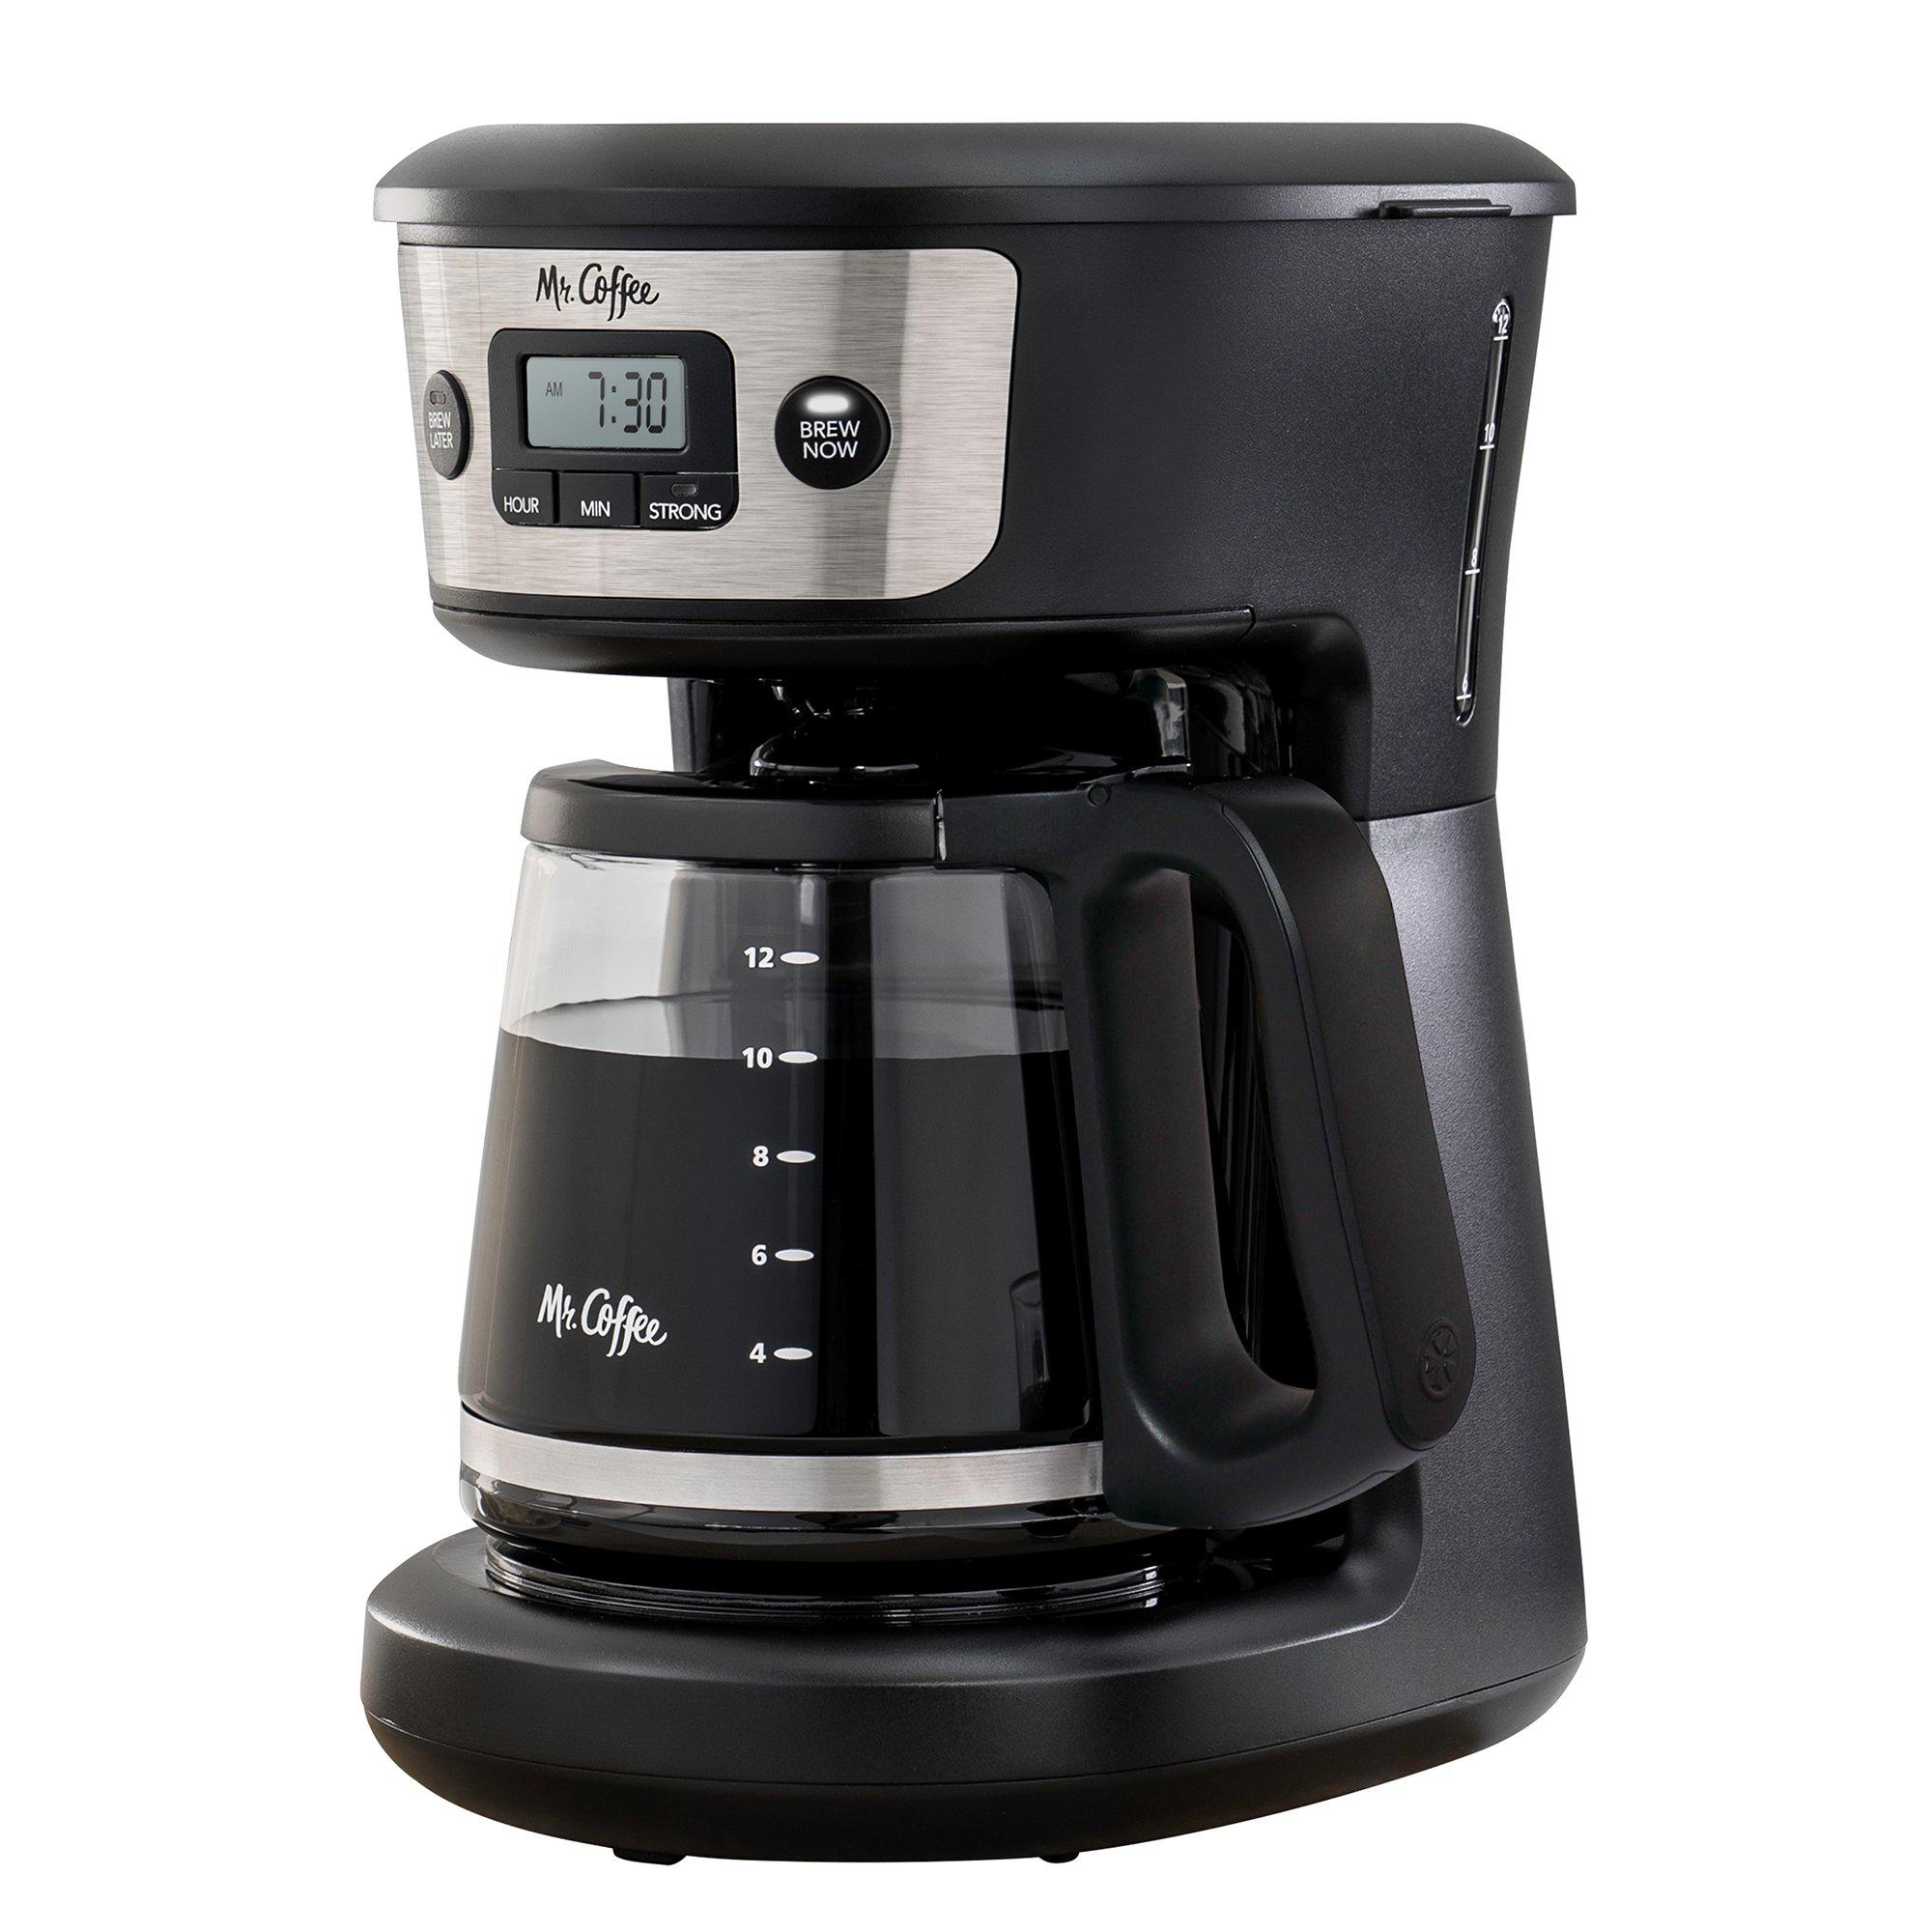 Toastmaster TCM10PW 10-Cup Automatic Coffee Maker